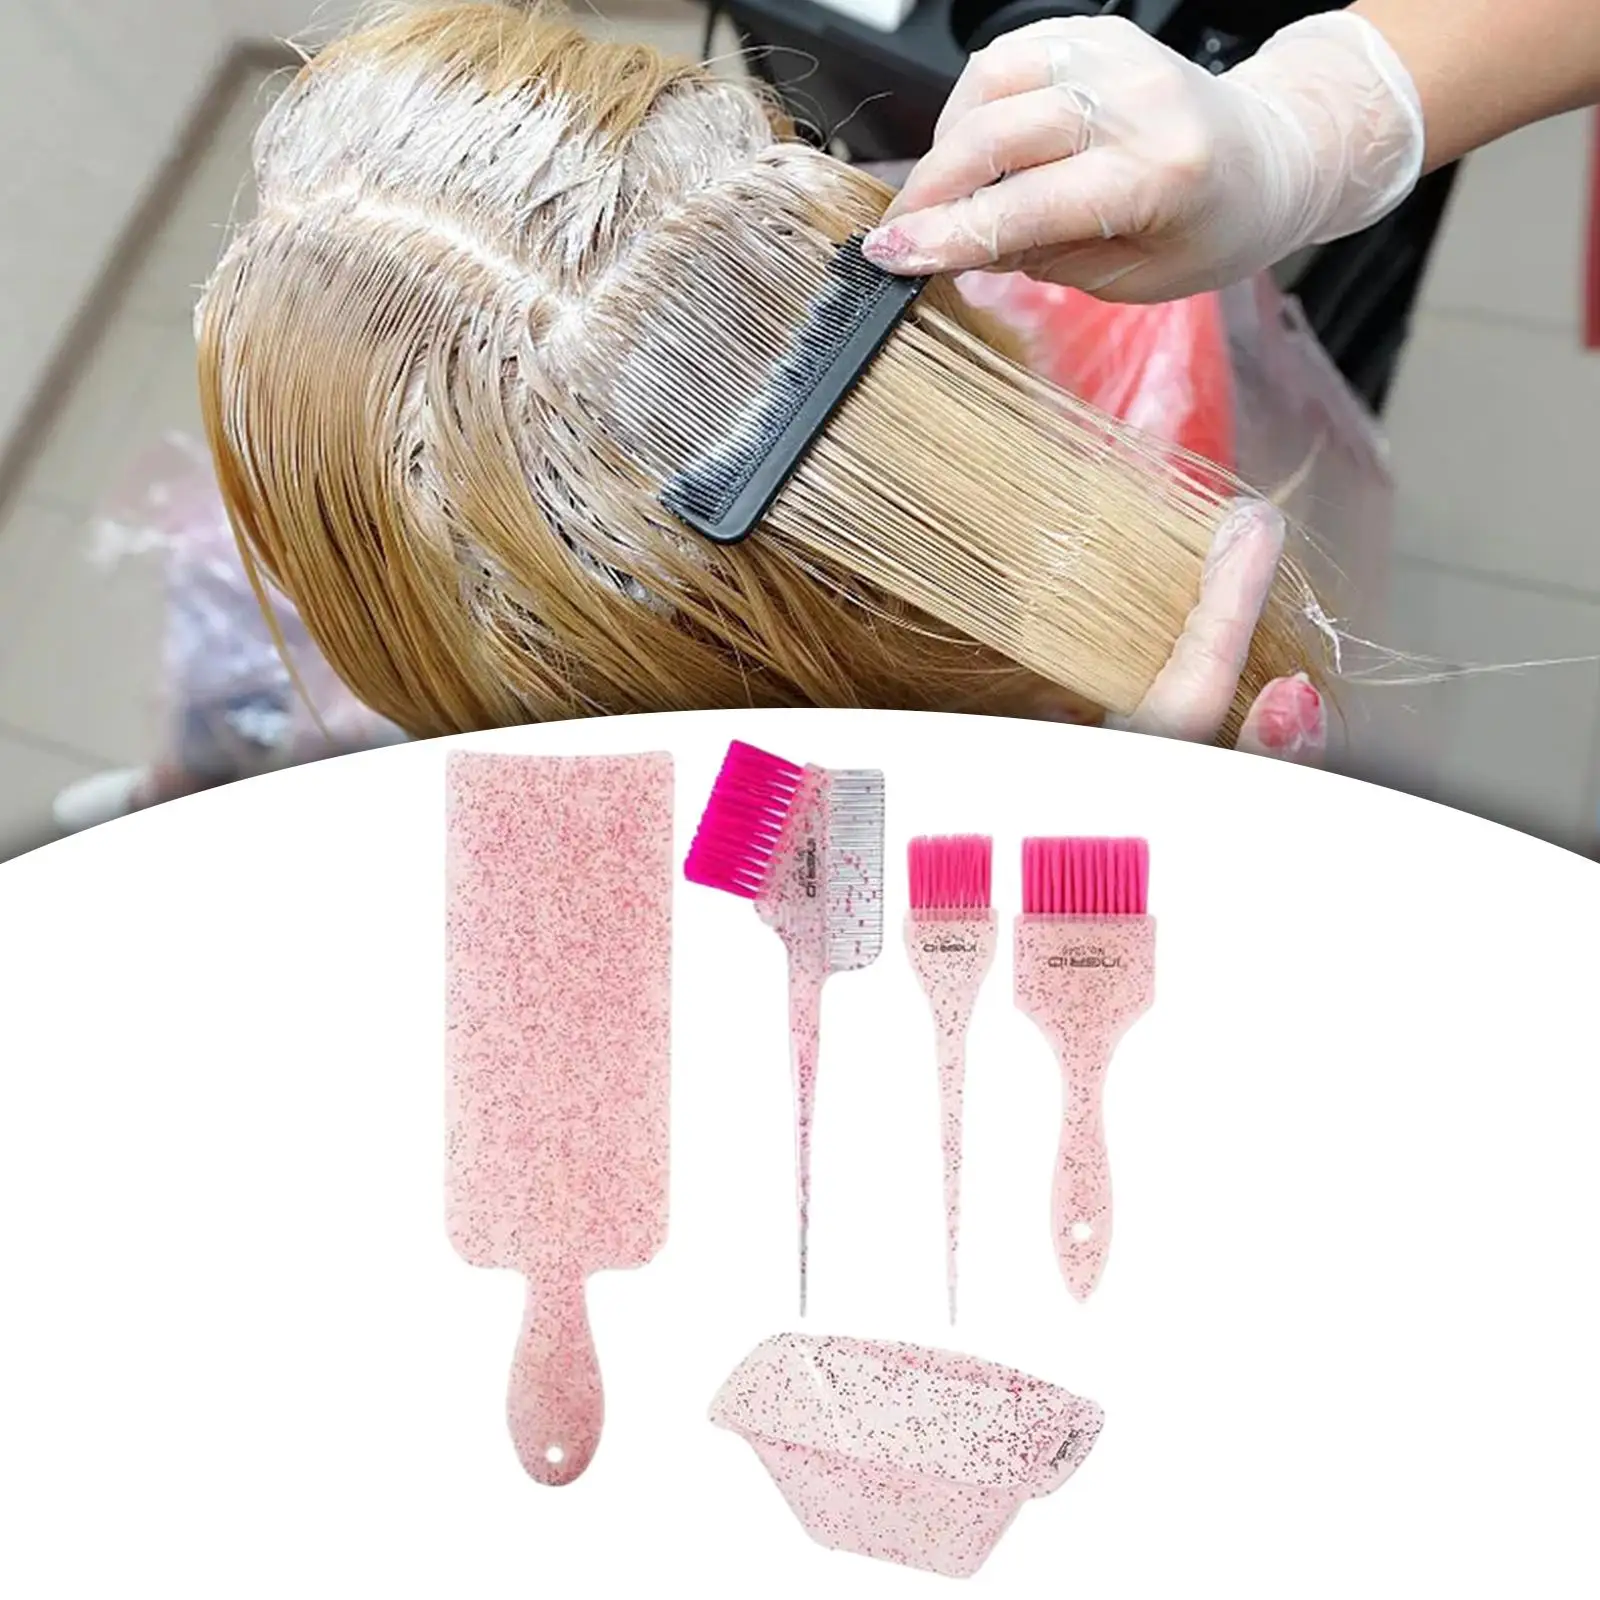 Salon Hair Coloring Dyeing Set Hair Styling Beauty Tool Hair Coloring Board per Salon home parrucchiere Barber Shops Beauty